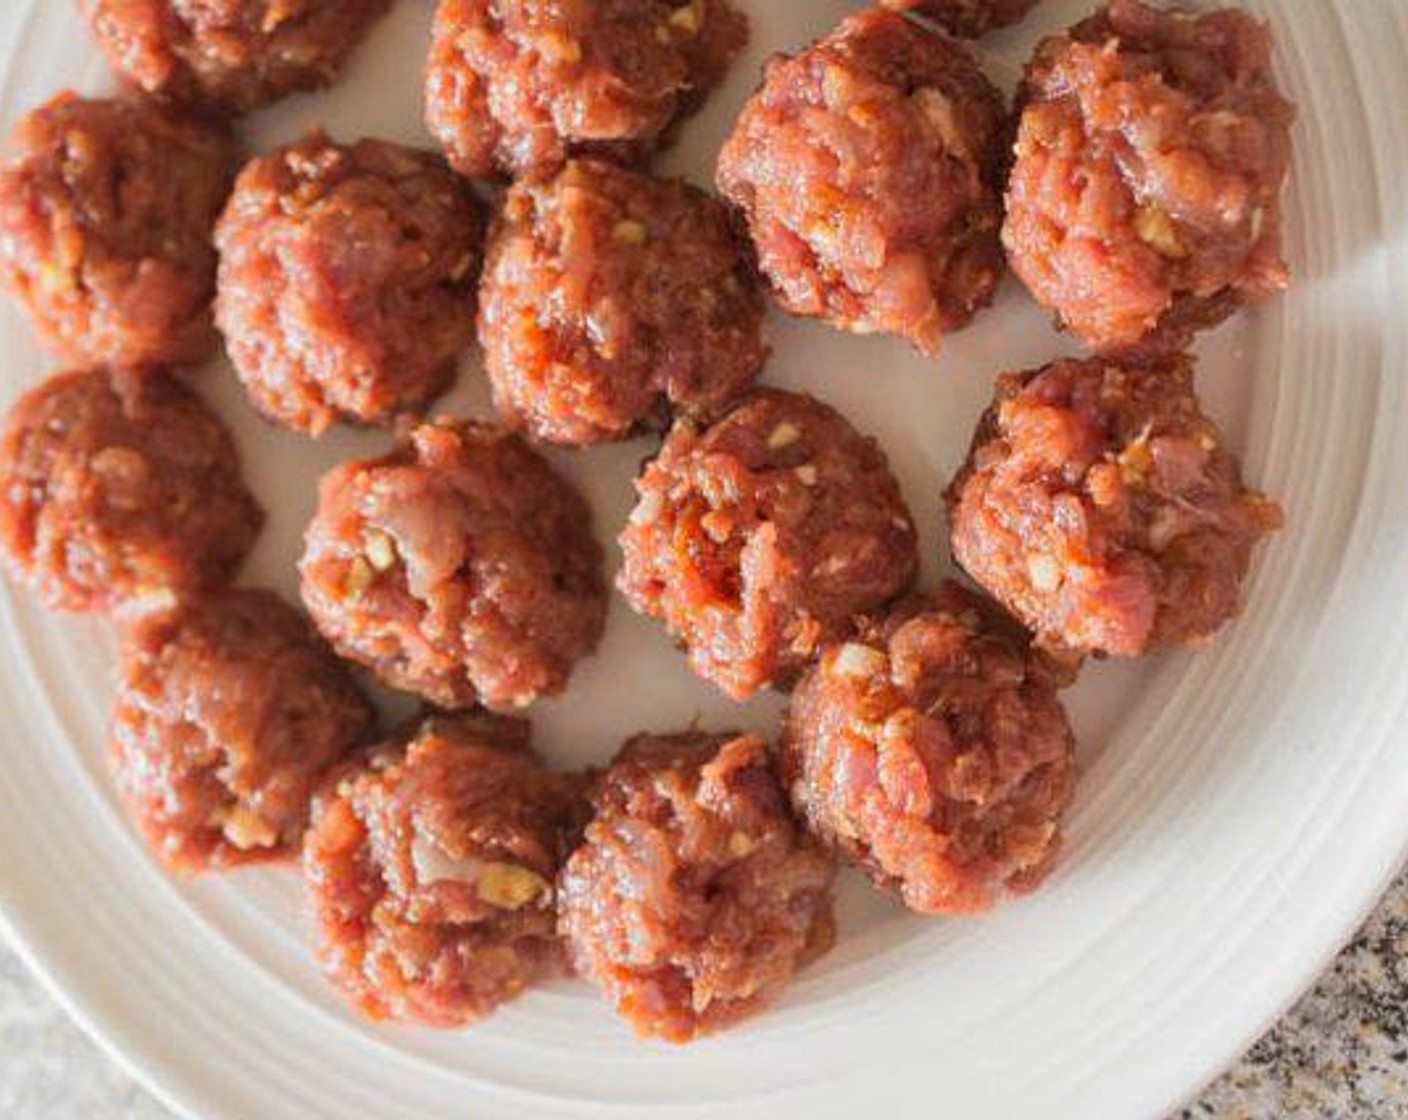 step 2 Roll the ground pork mixture into 1 1/2 inch meatballs (approximately 1 heaping tablespoon each).